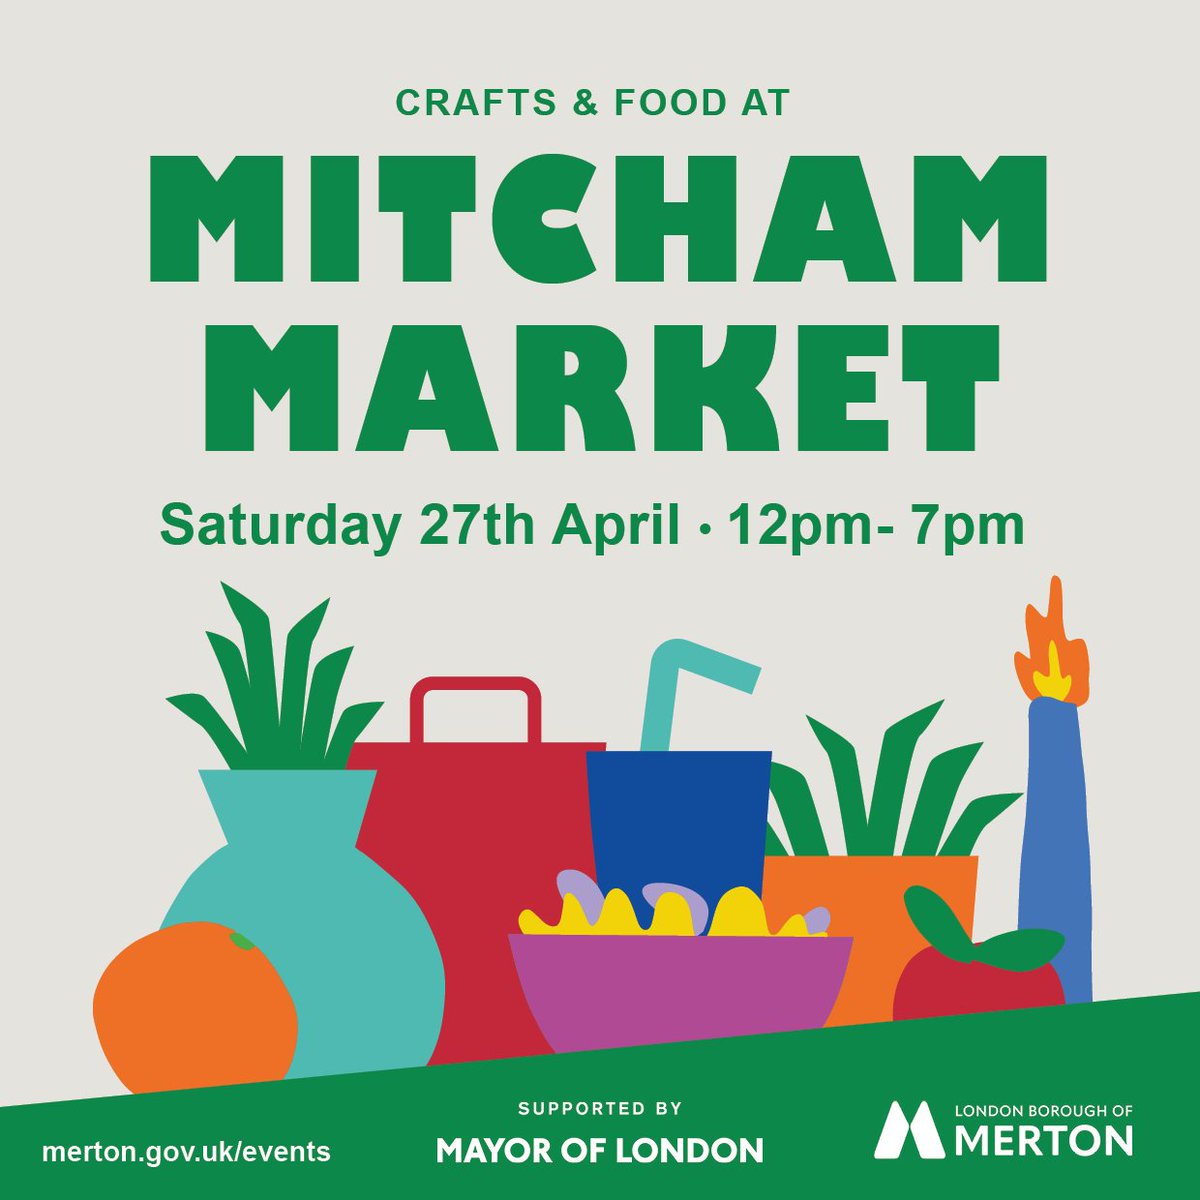 Saturday 27 April noon to 7pm craft and food market in #MitchamVillage. Spread the word. More markets in #Mitcham